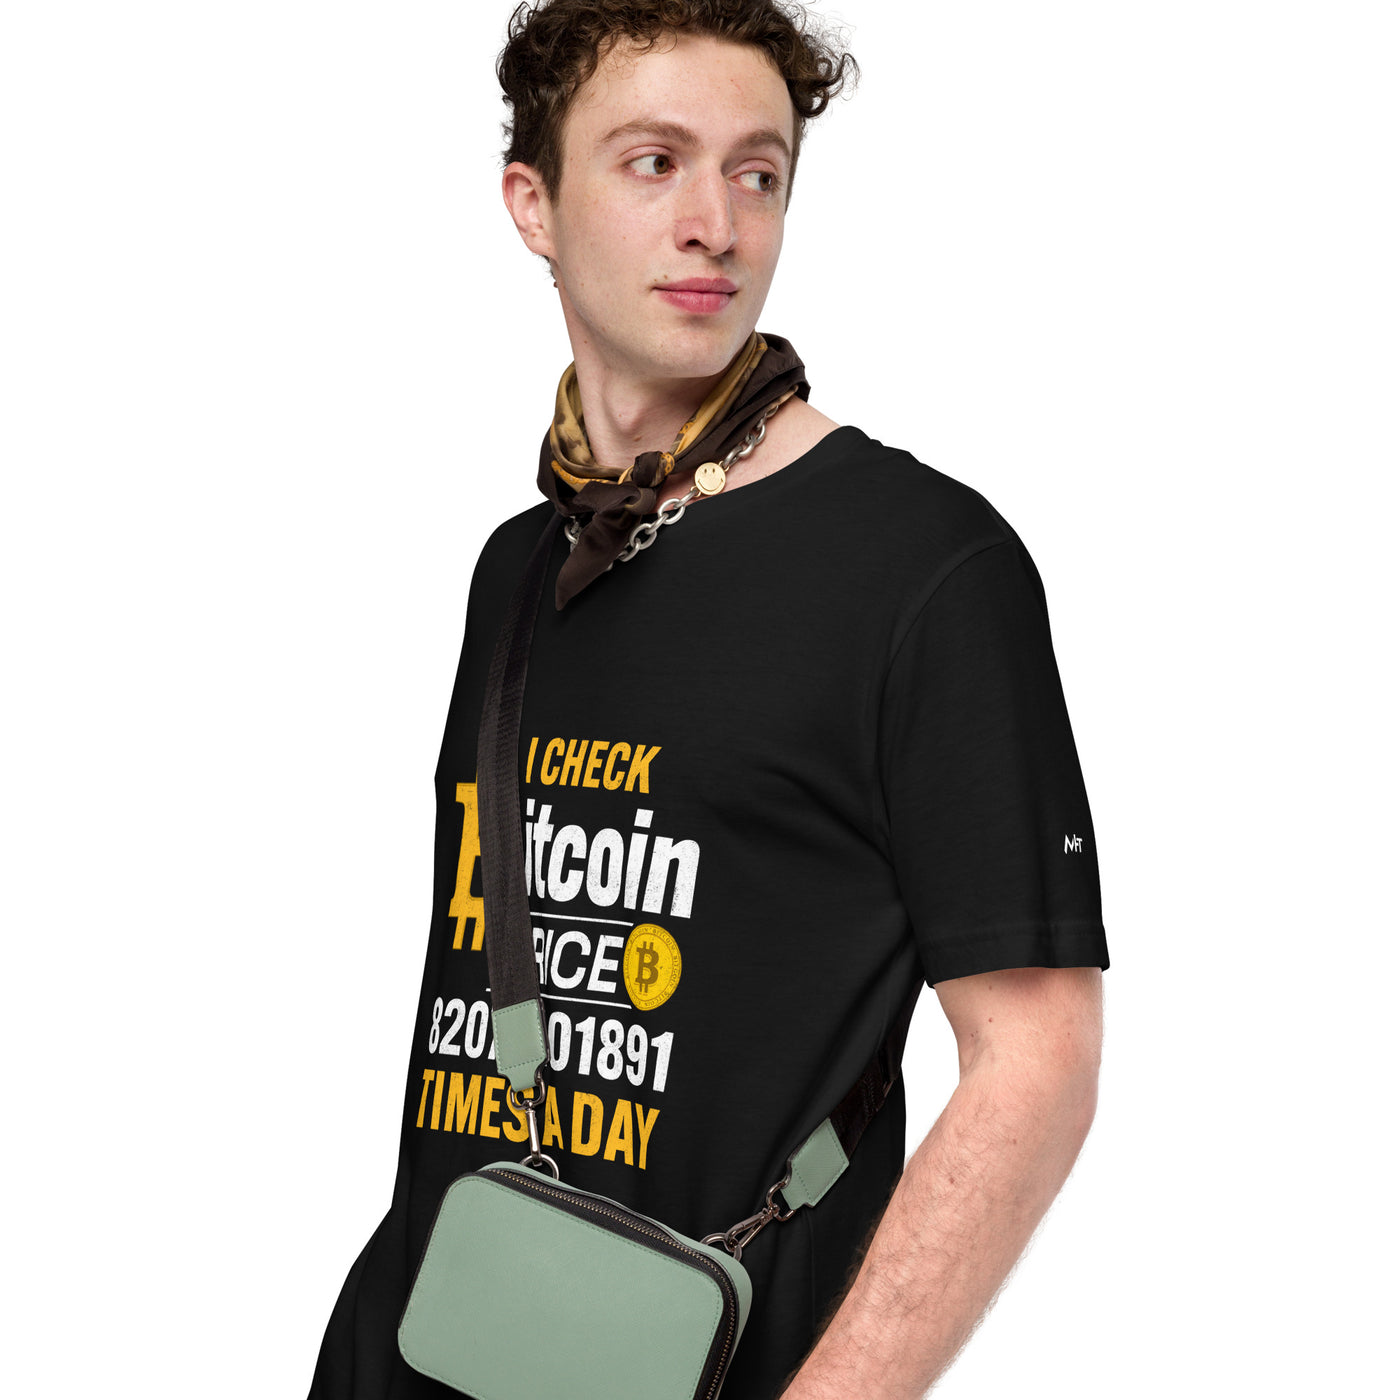 I check Bitcoin Price 82077401891 times a day - Unisex t-shirt